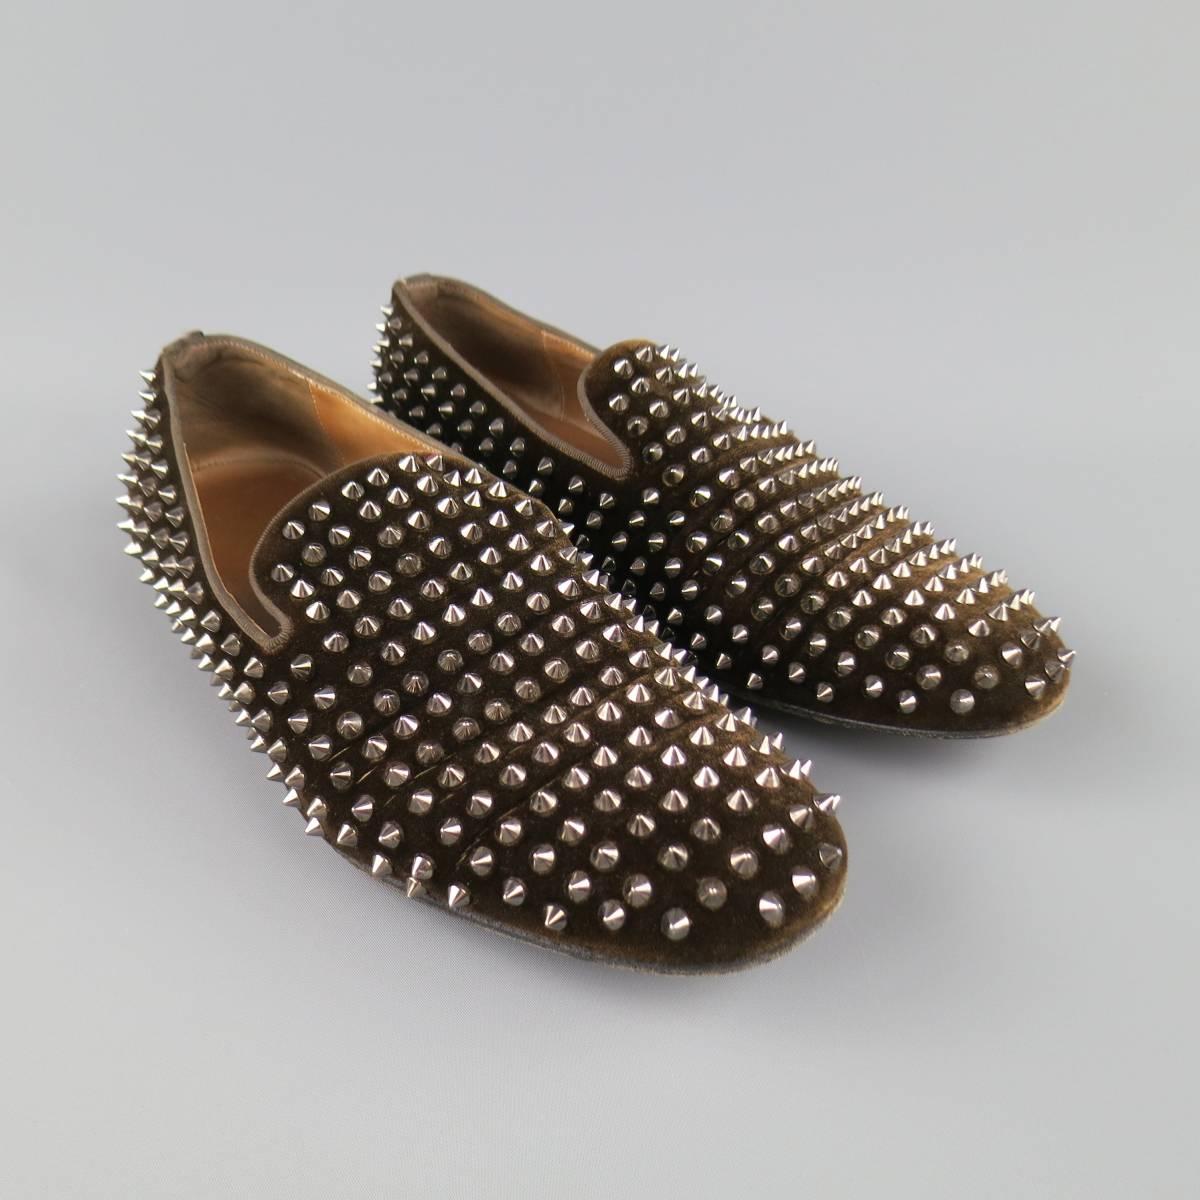 CHRISTIAN LOUBOUTIN  "Rollerboy Spikes" Loafer consists of velvet material in a brown color tone. Designed in a slip-on style, spike studs throughout body in a silver tone. Brown heel and red sole. Damaged bottom sole. Comes with original